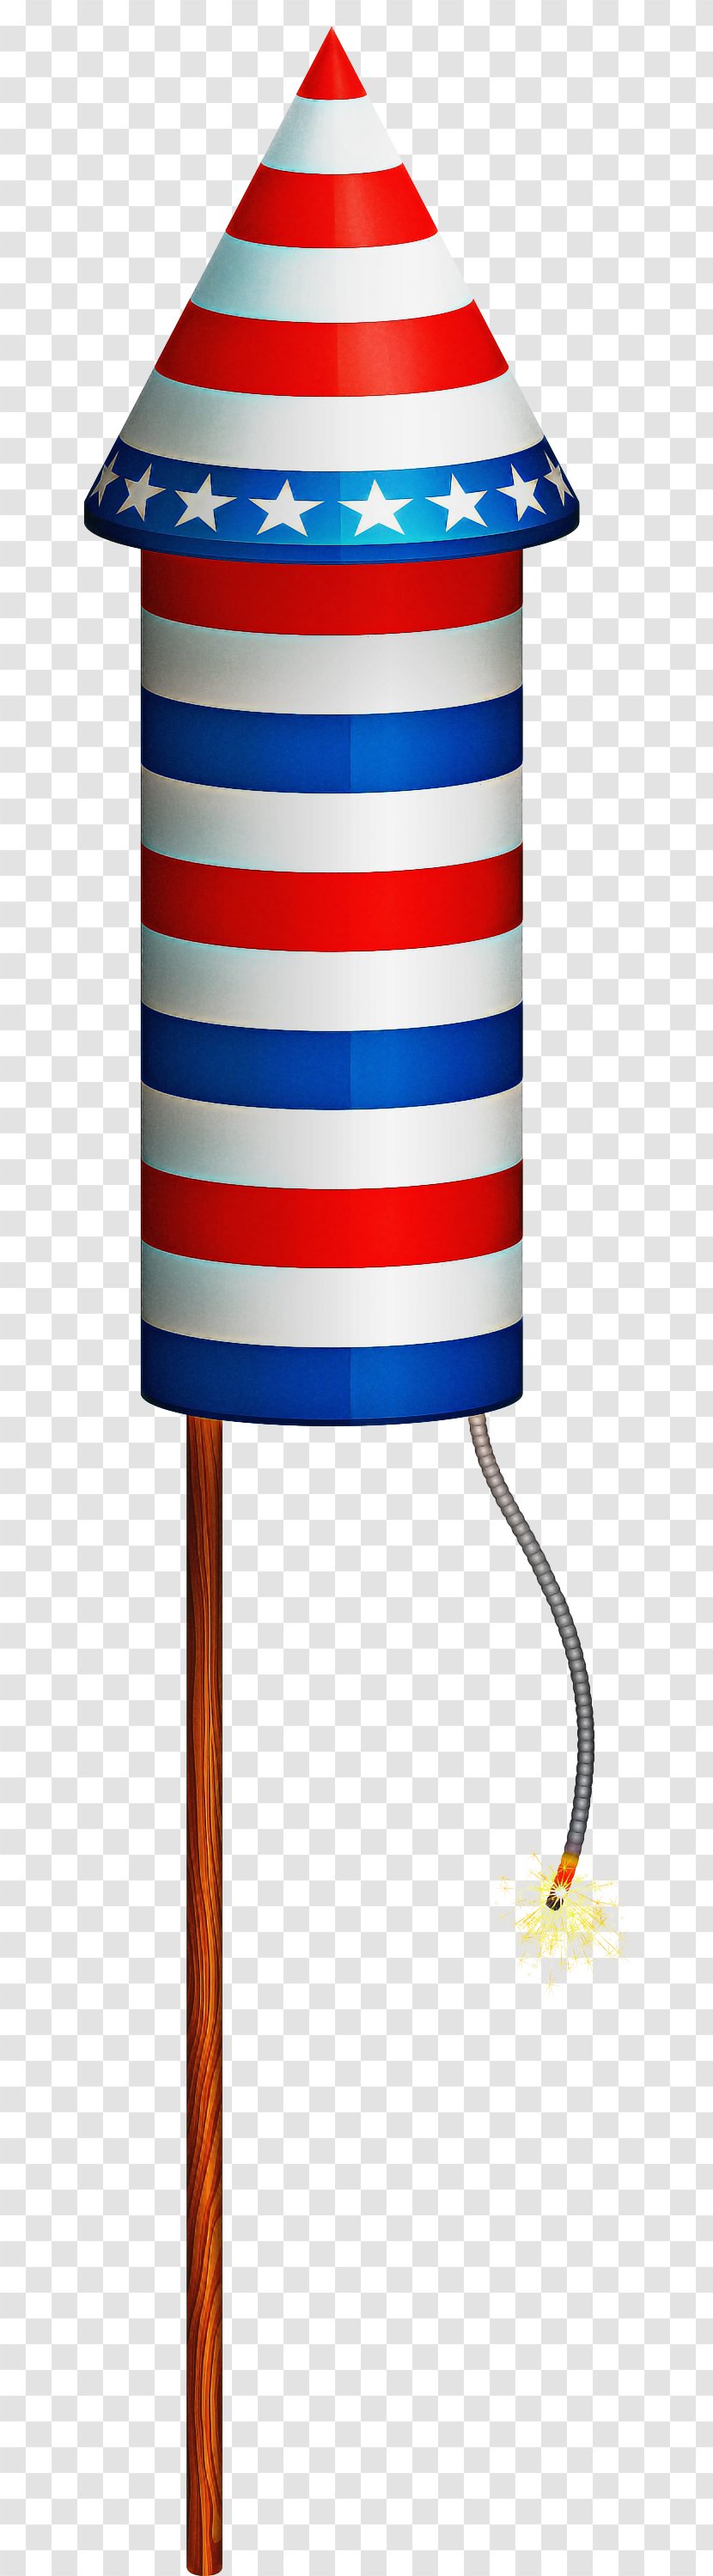 Flag Electric Blue Lampshade Transparent PNG